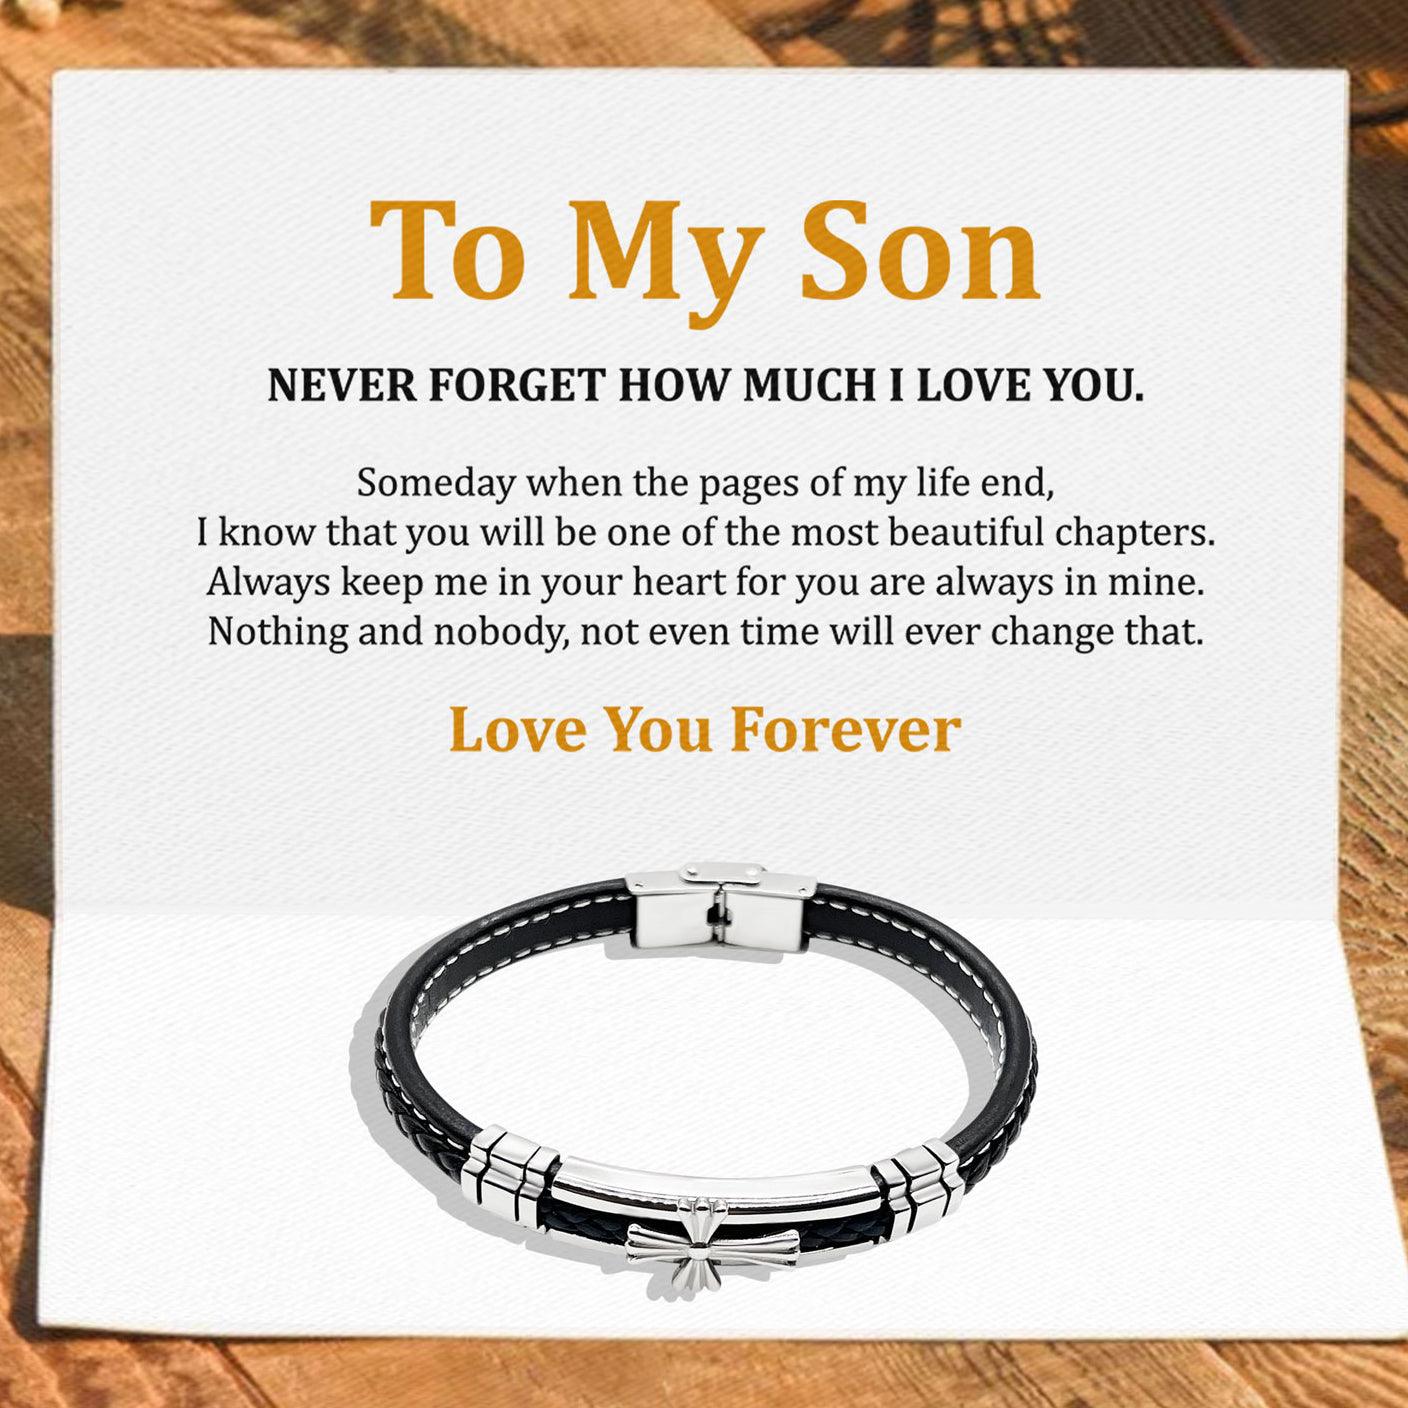 To My Son - Never Forget How Much I love You - Premium Stainless Steel Celtic Cross Black Italian Leather Bracelet - TRYNDI